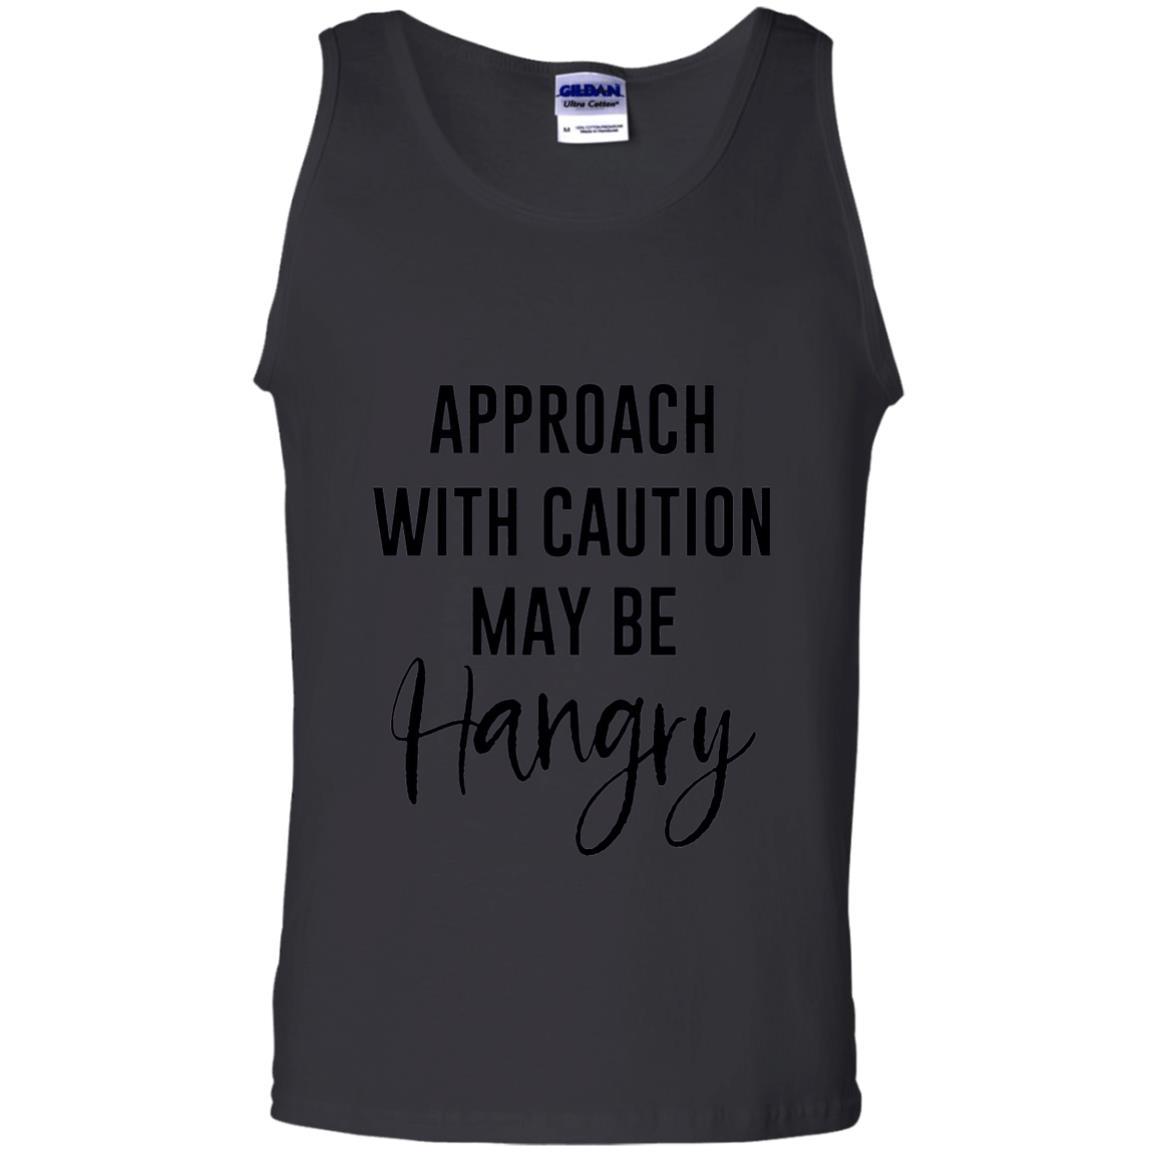 Approach With Caution Maybe Hangry T-shirt